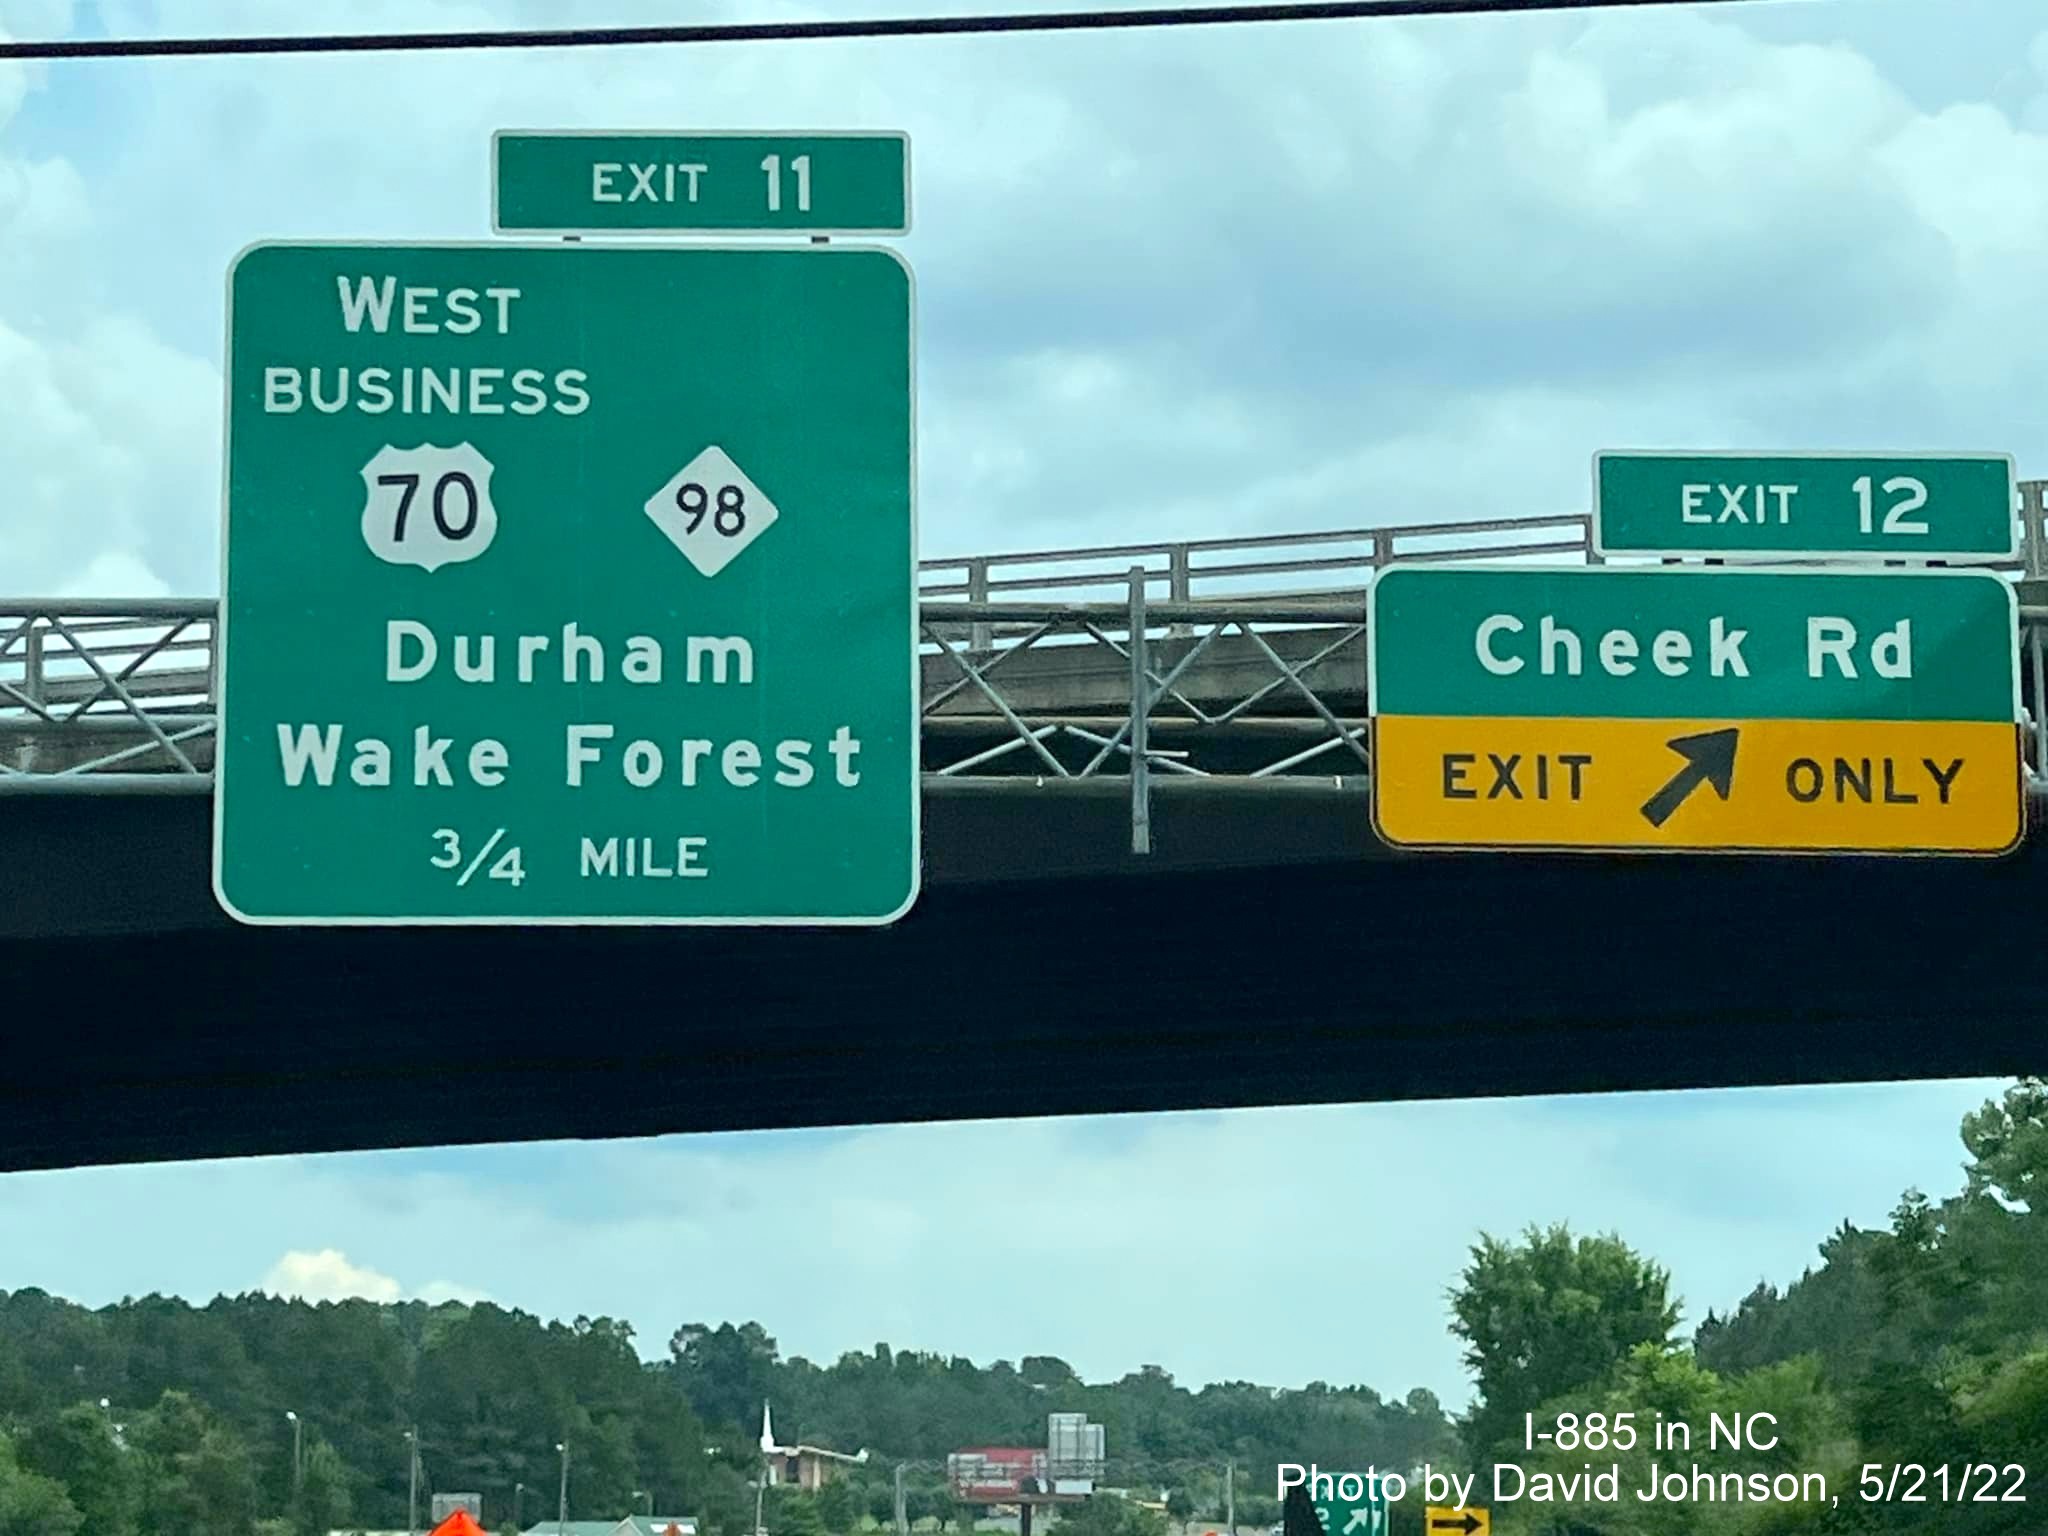 Image of new exit number tabs based on I-885 mileposts for Cheek Road and Business US 70/NC 98 exits on US 70 East
                                          (Future I-885 South) in Durham, by David Johnson, May 2022